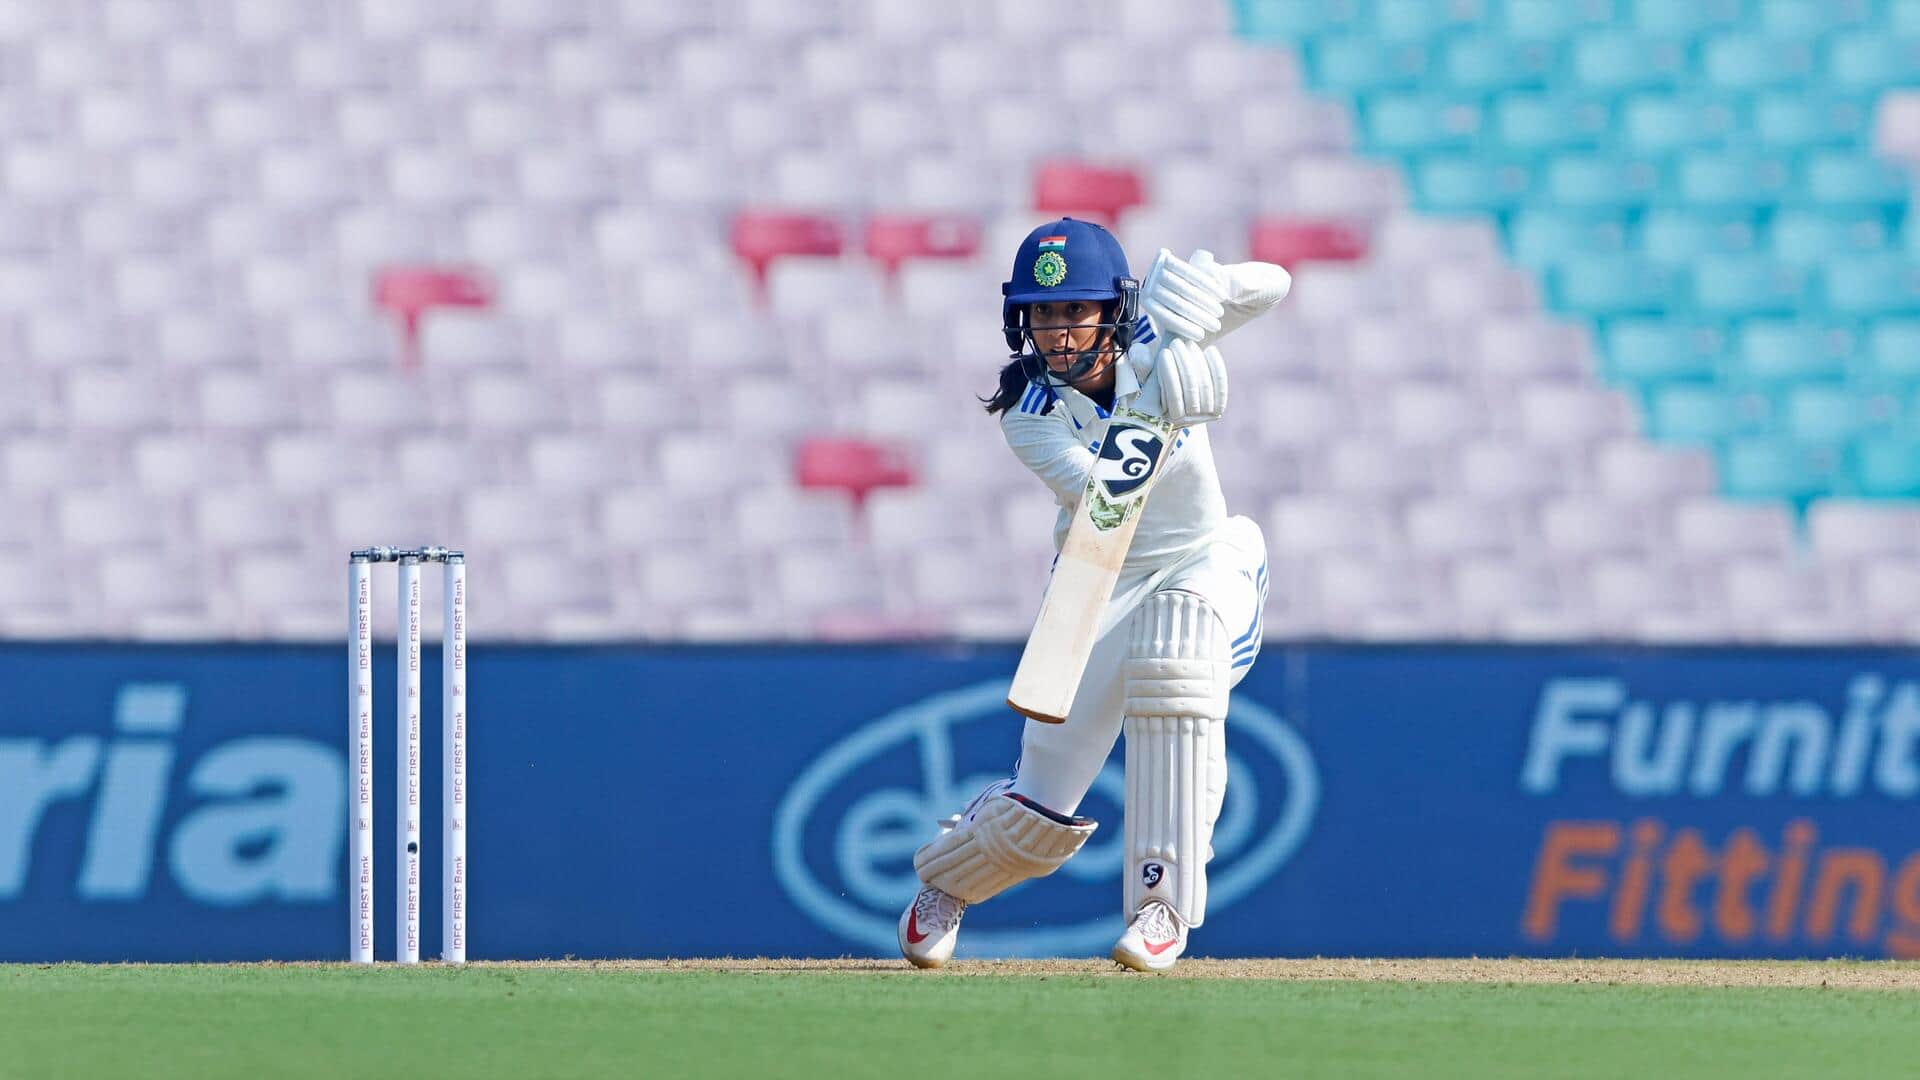 INDW vs ENGW: Jemimah Rodrigues slams fifty on Test debut